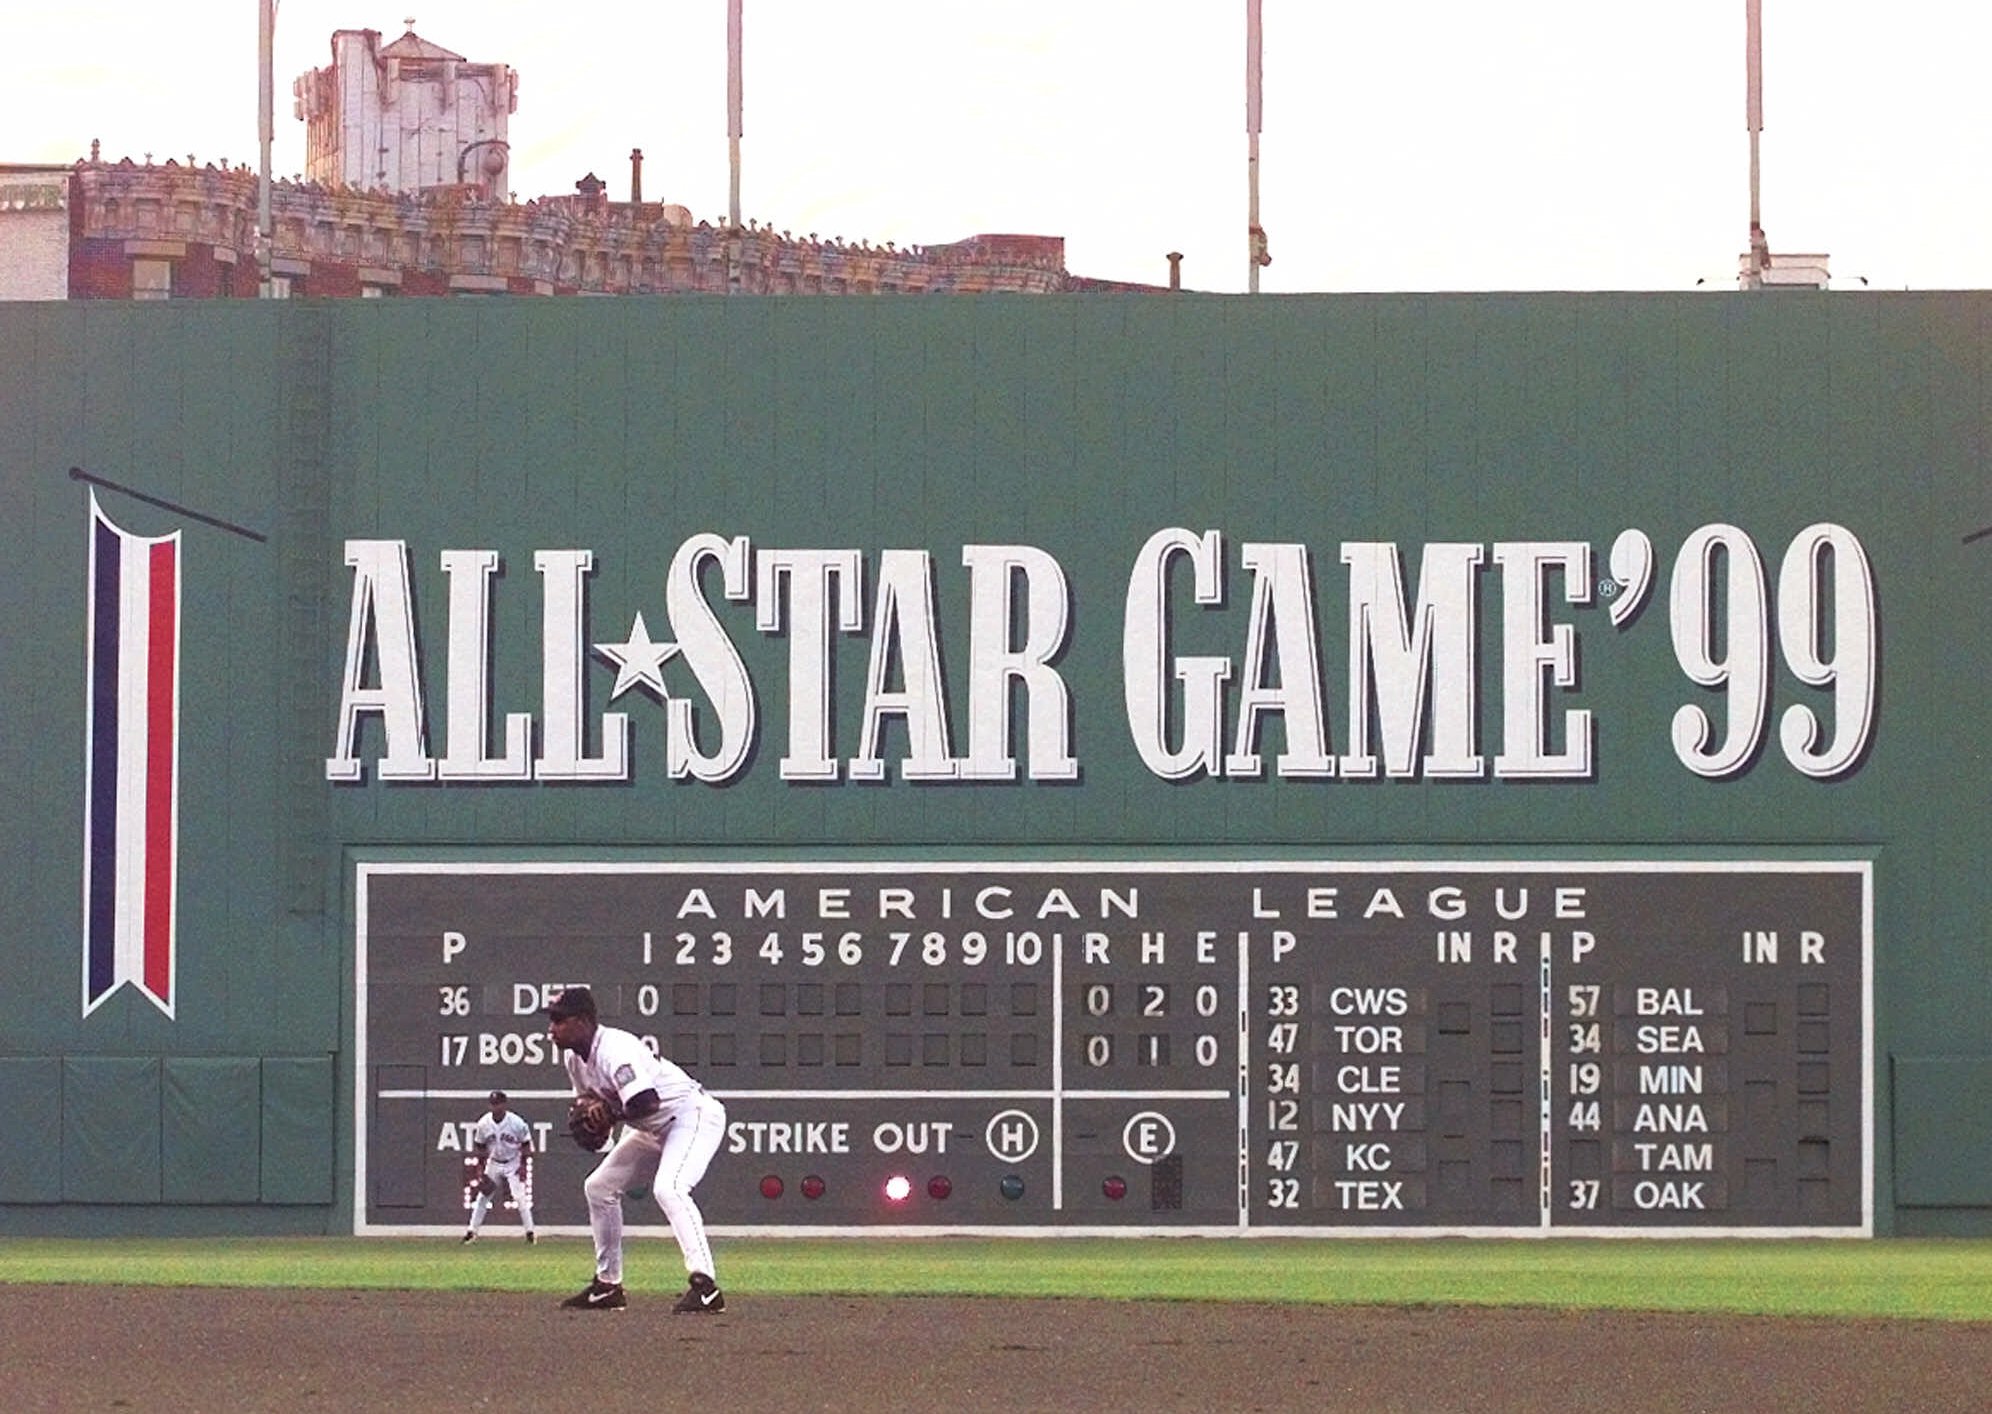 Fenway Park at the 1999 All-Star Game